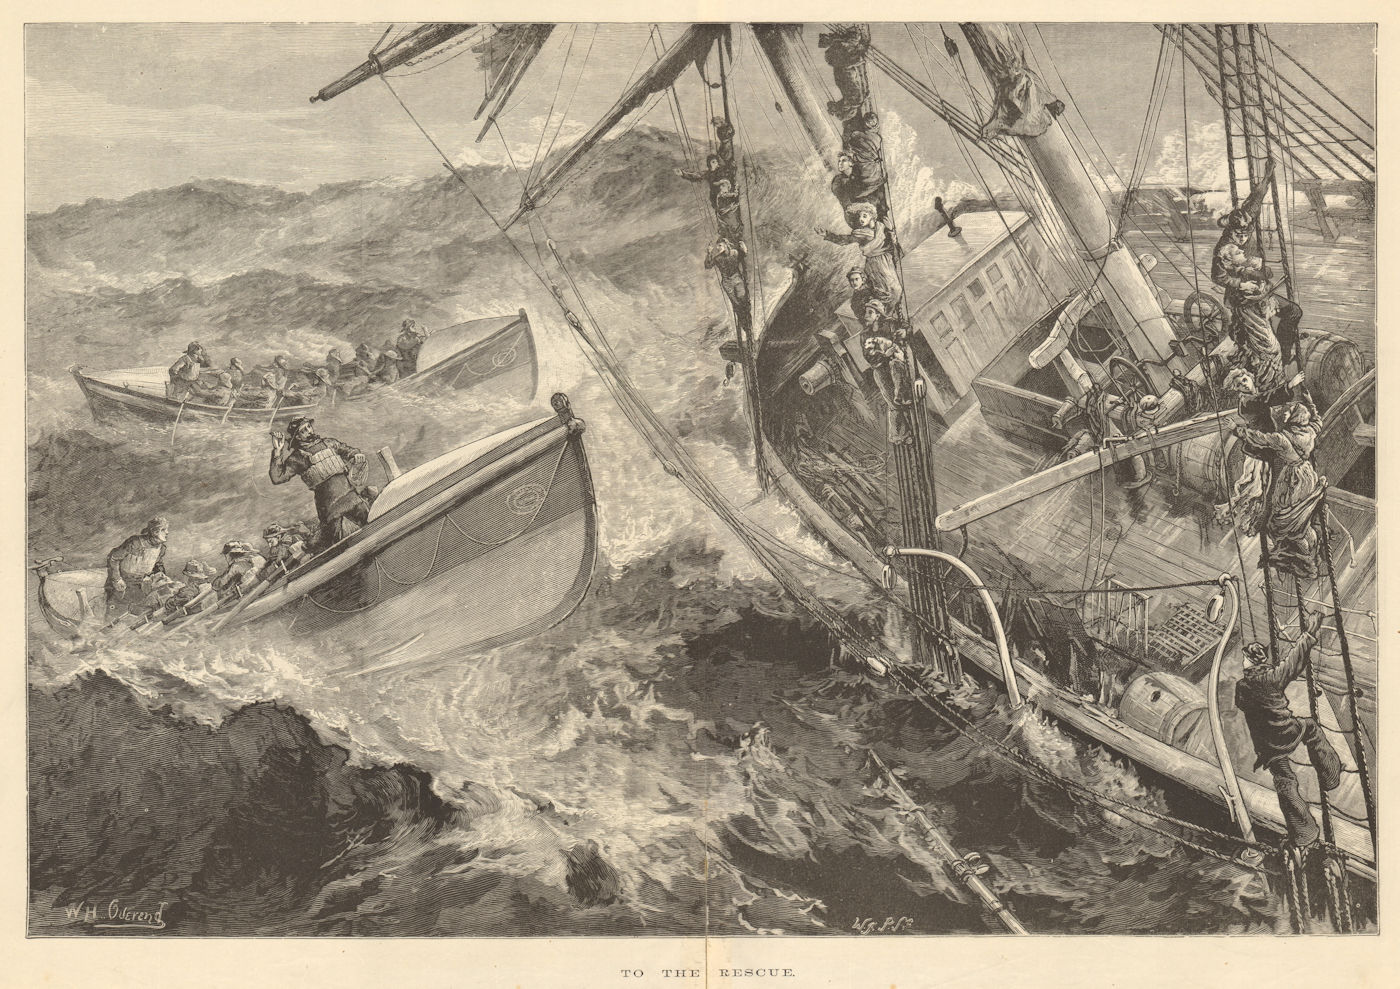 Associate Product To the rescue. Ships. Lifeboats. Disasters 1877 antique ILN full page print